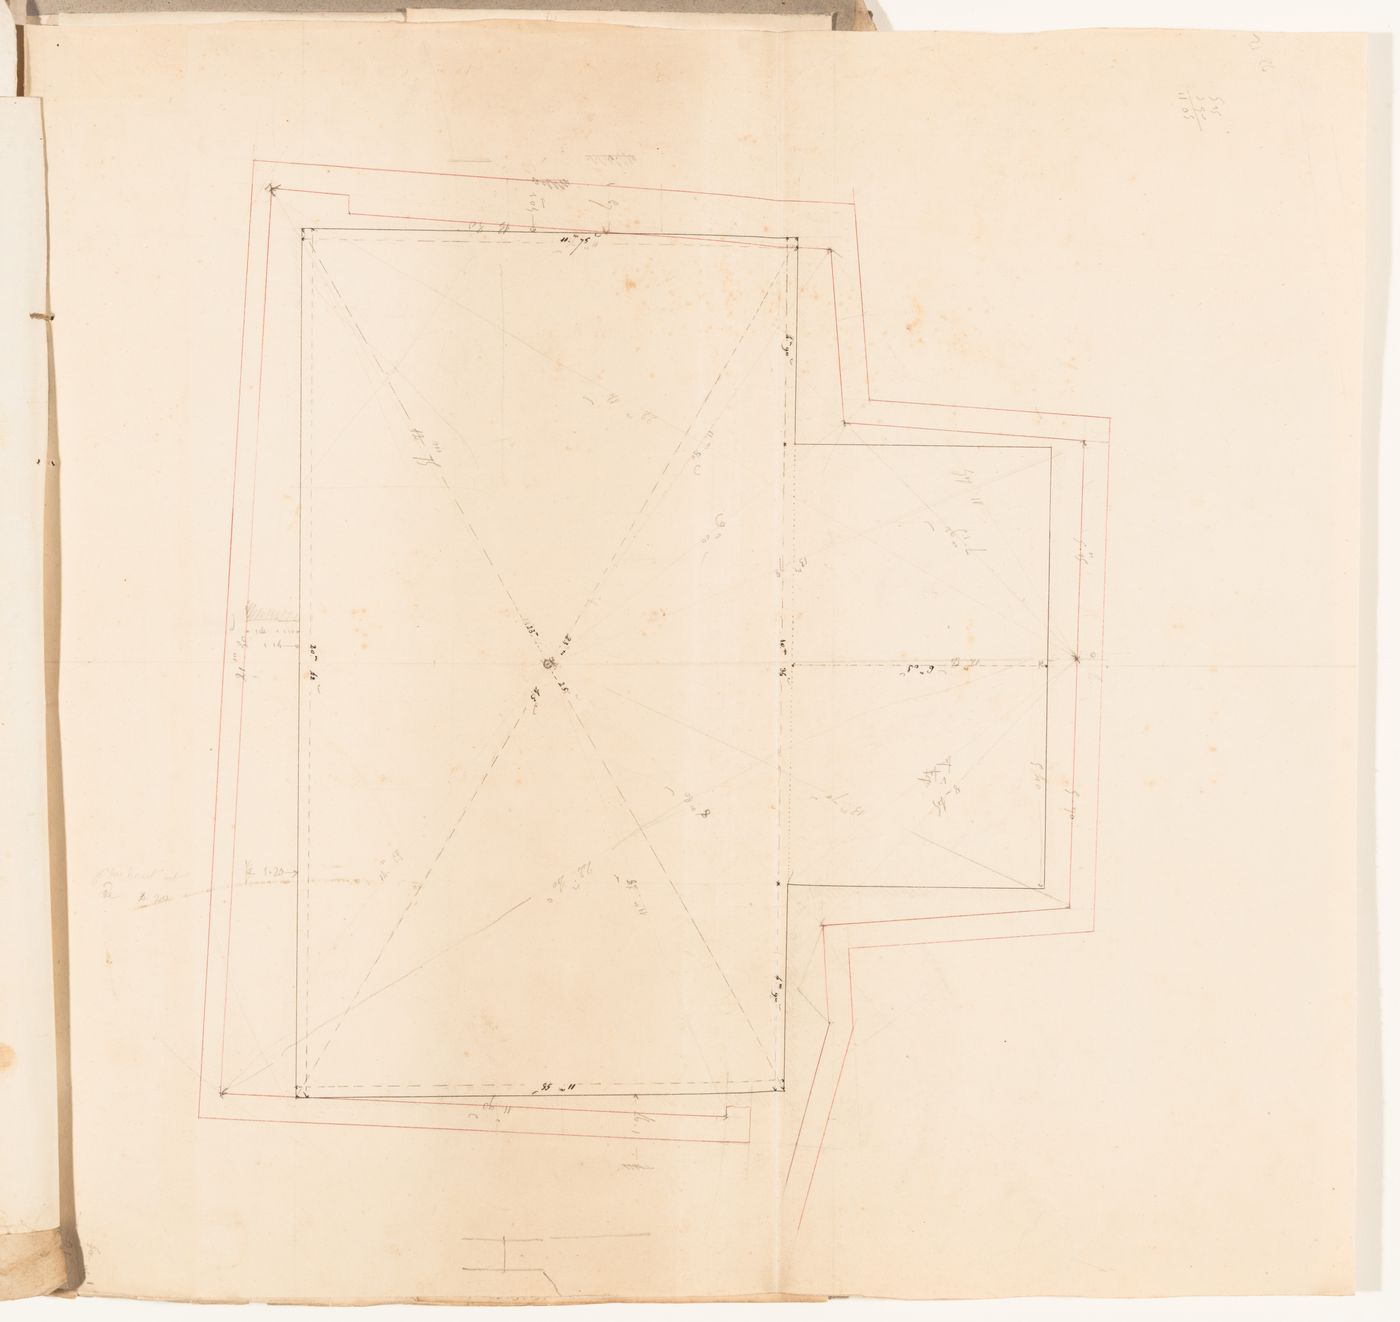 Floor or ceiling plan of a bath, probably the Thermes de Julien